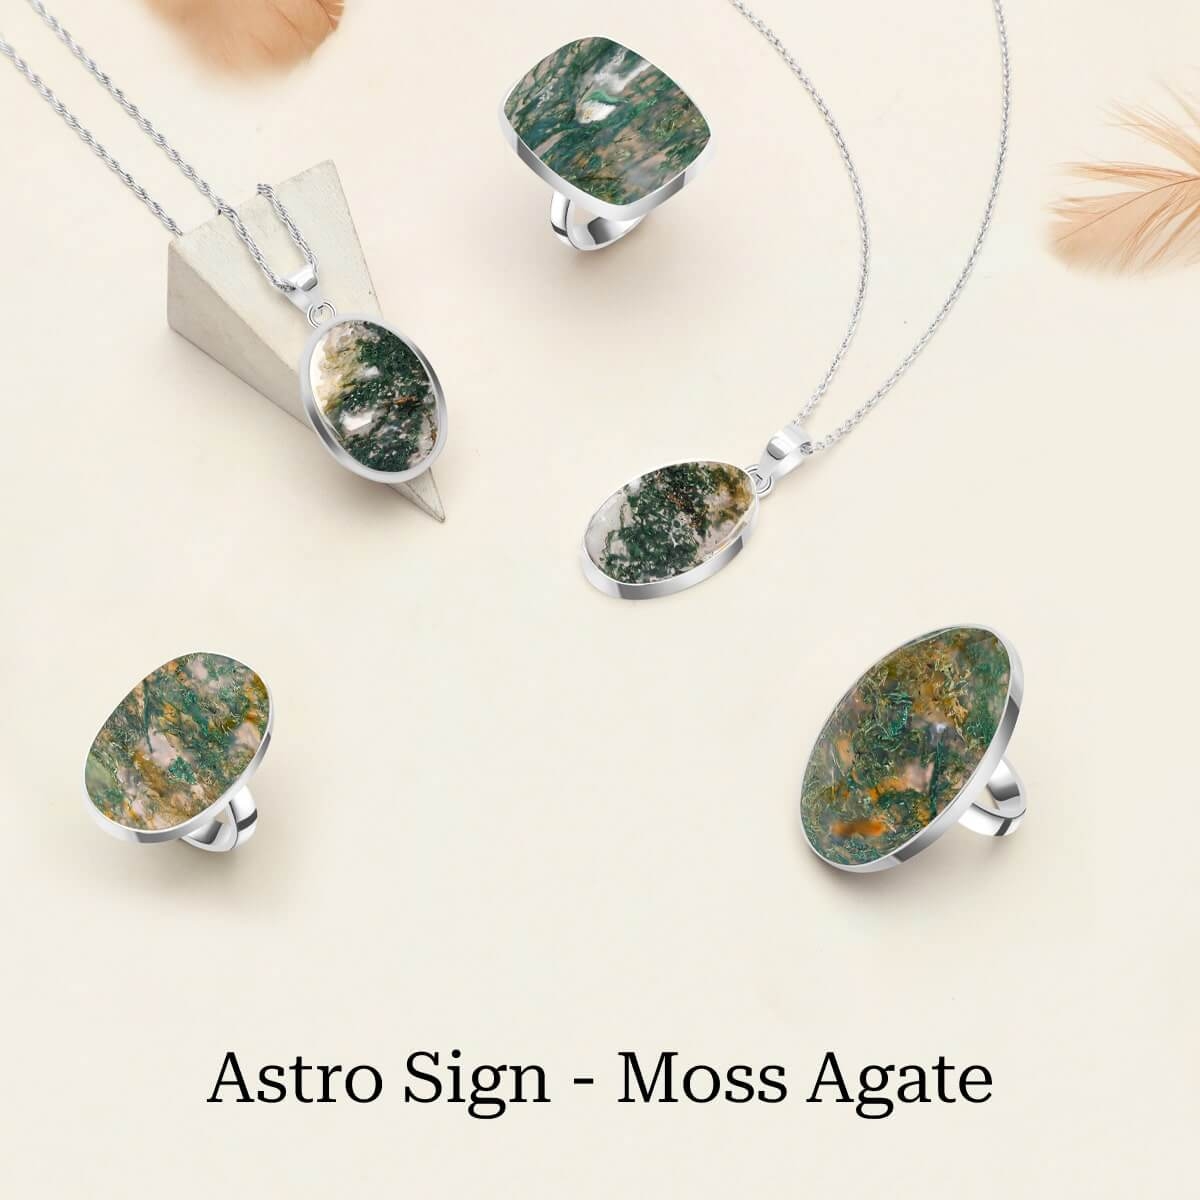 Moss Agate is the Birthstone of Which Zodiac Sign